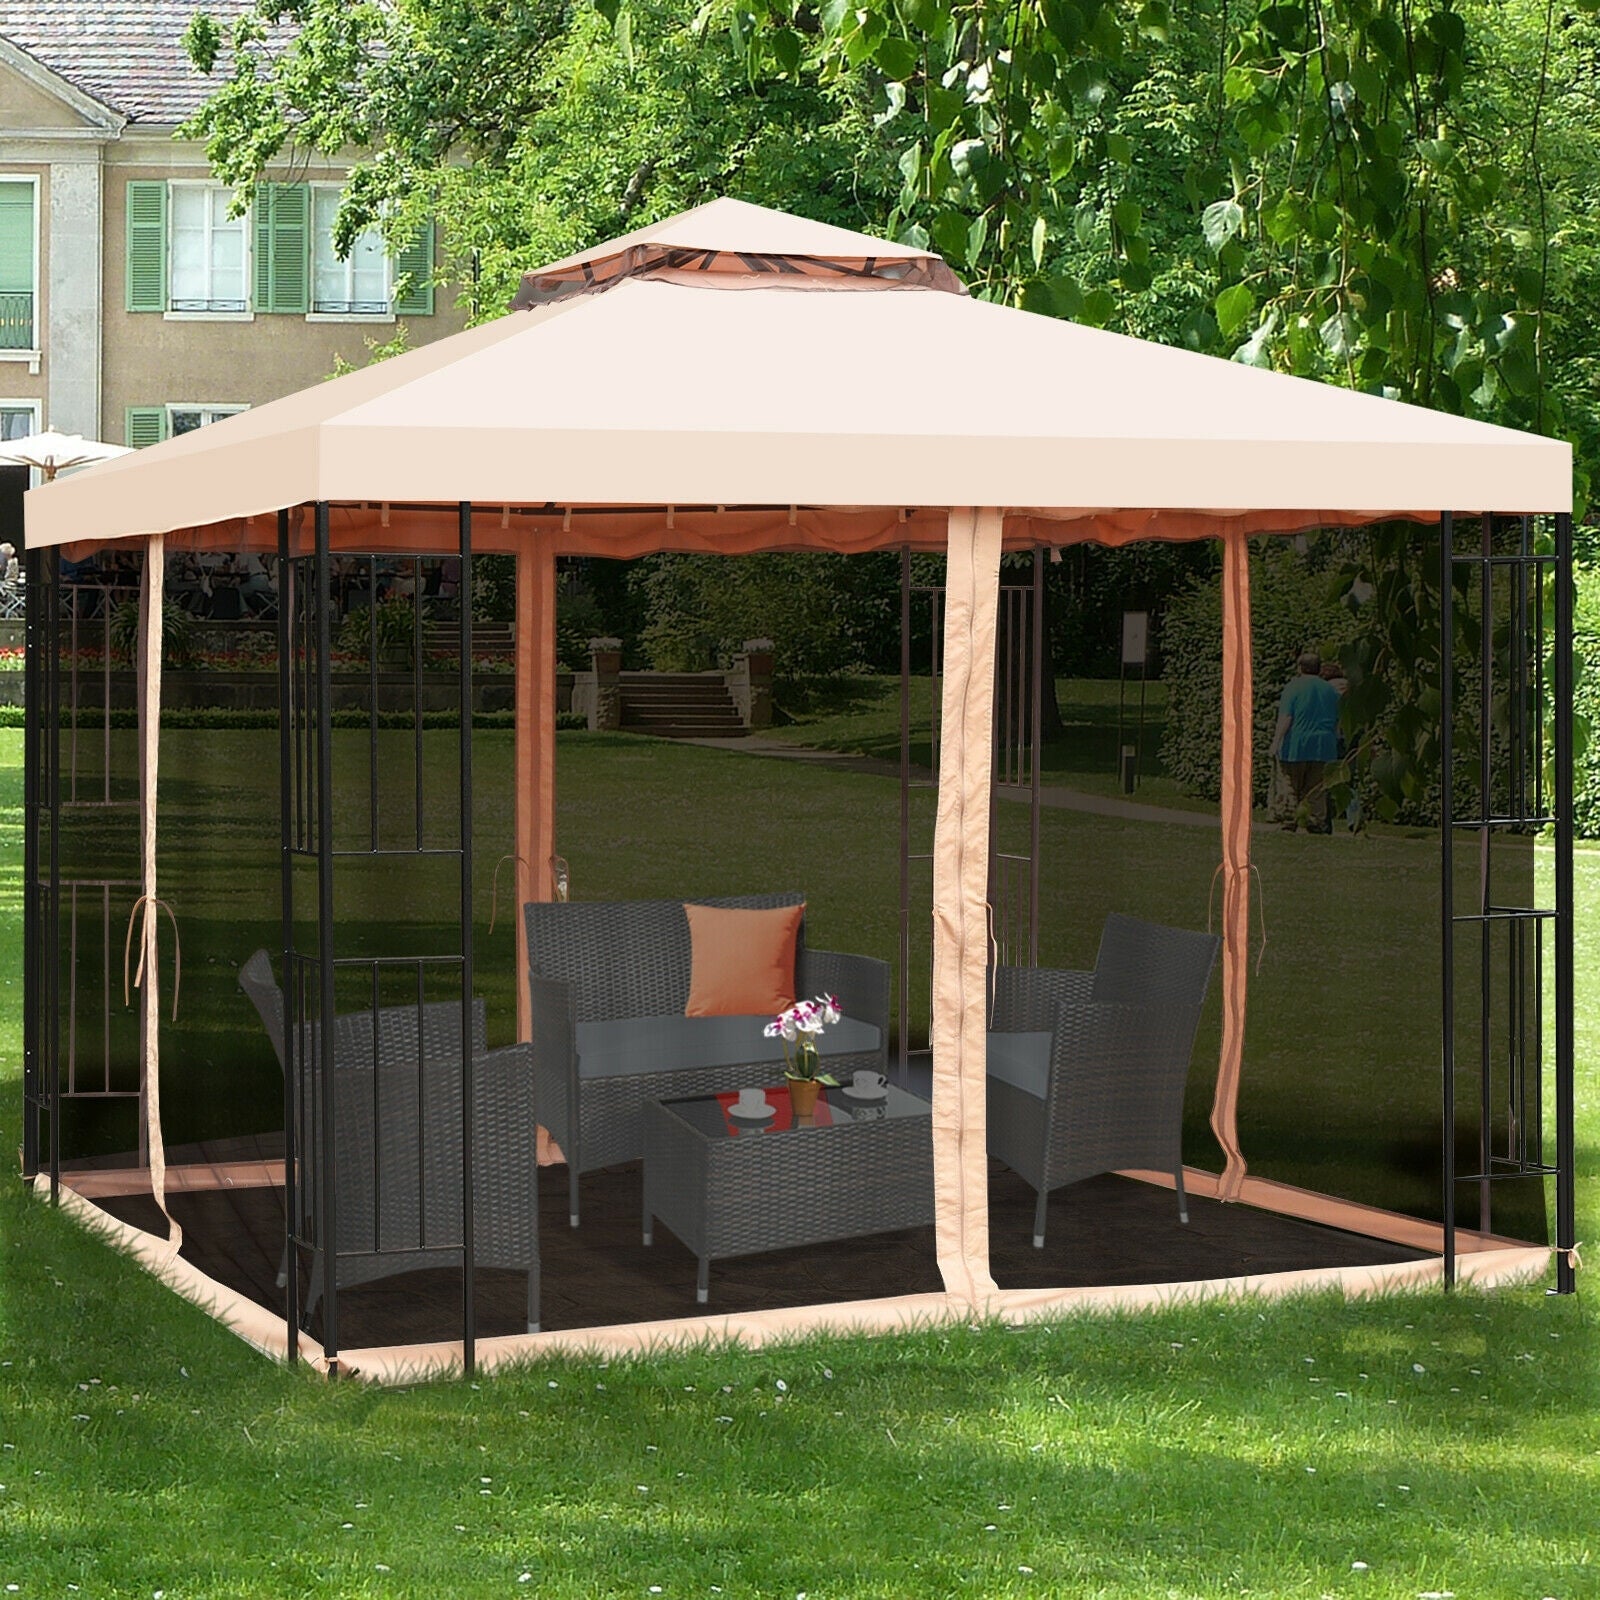 10 x 10 ft 2-Tier Vented Metal Gazebo Canopy with Mosquito Netting